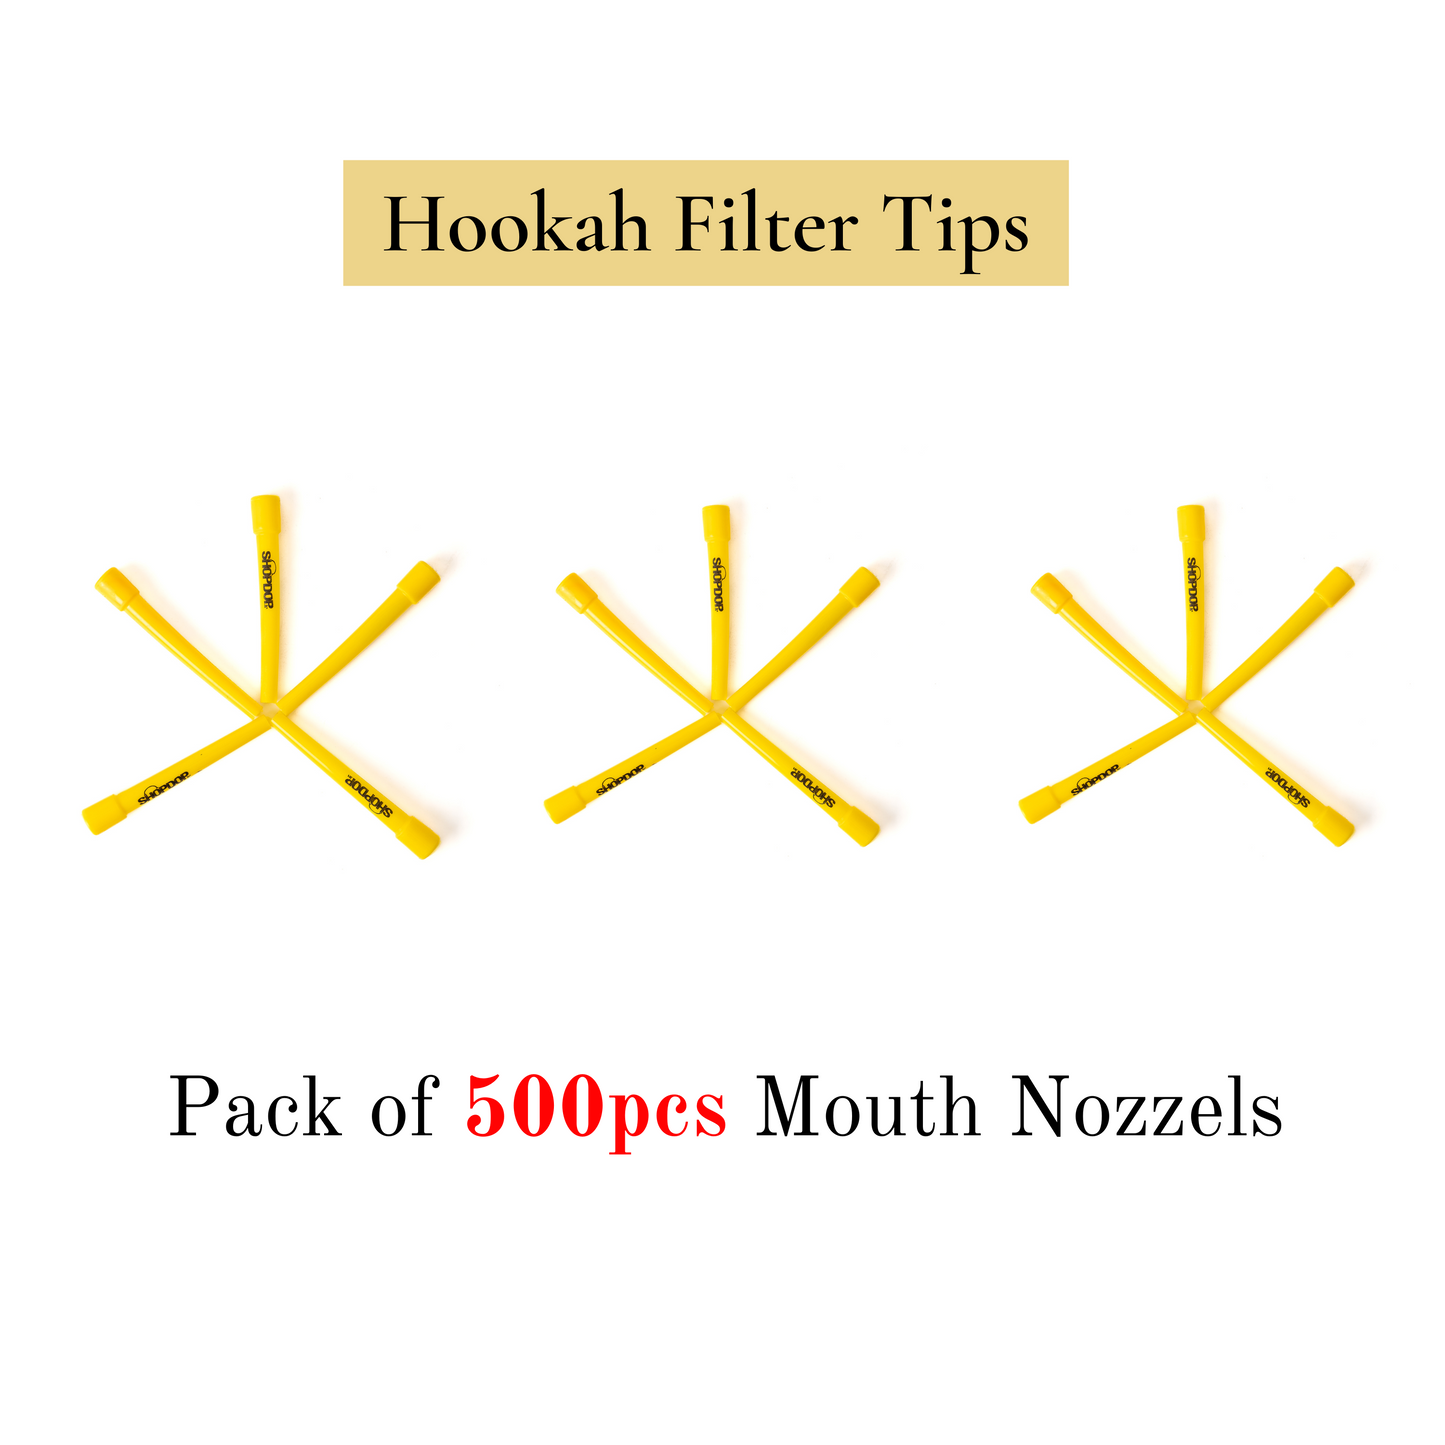 Shopdop Hookah Mouth Tips Filters (Pack of 10)